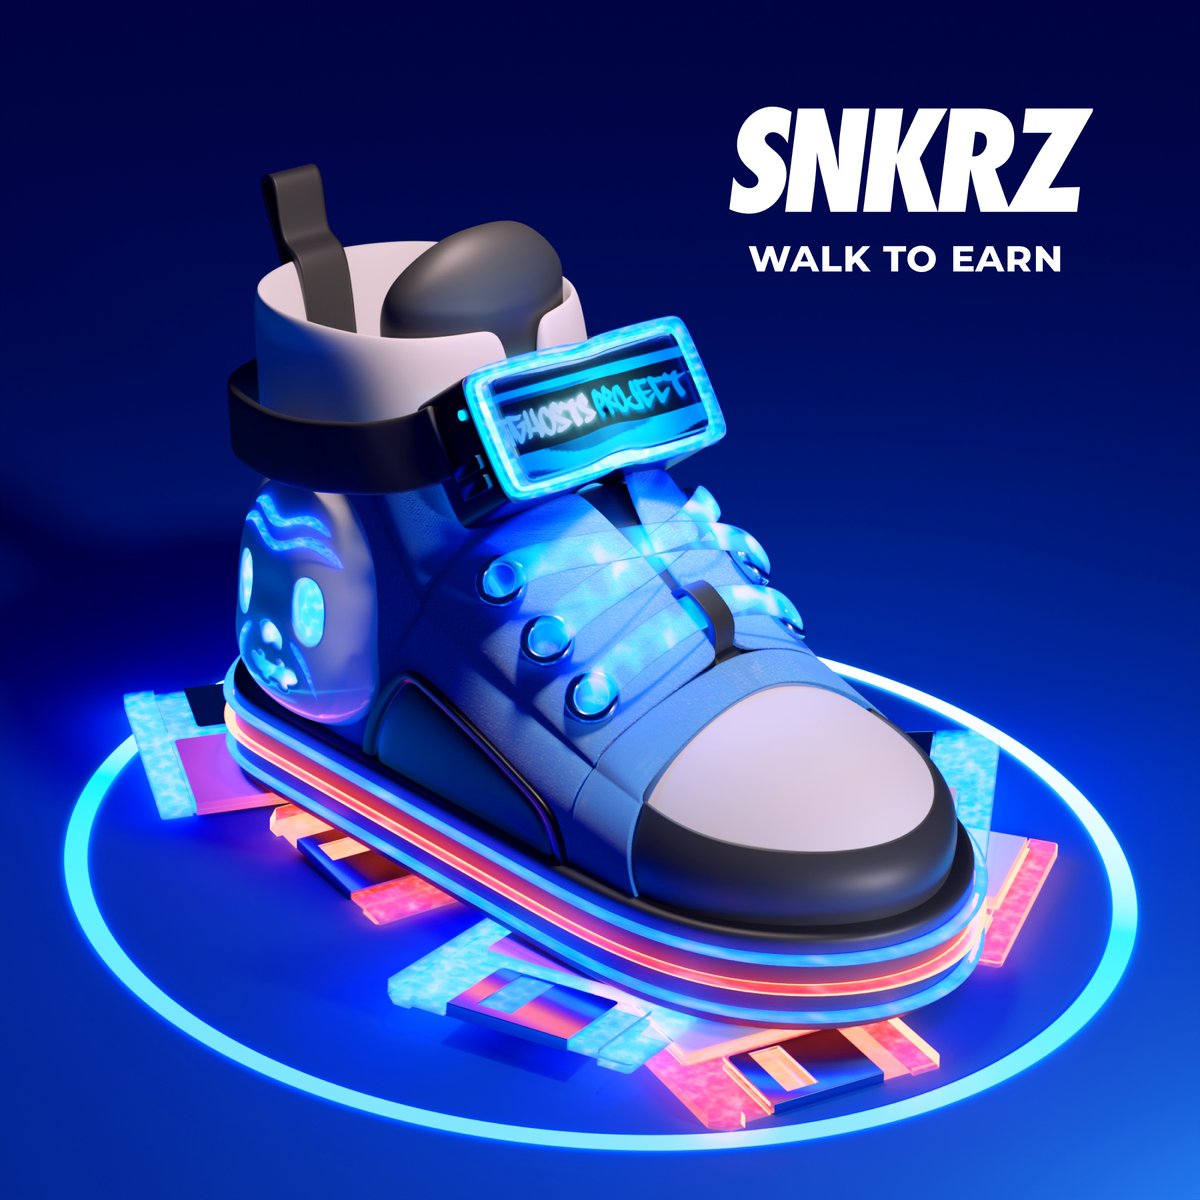 SNKRZ❤️@Ghosts_project As a fan of the Ghost Project, We prepared a collaboration shoes! Let’s revive Ghosts and start #MoveToEarn 🎁3 Airdrops 30 Tester for Winners! 🎁10 WL for Ghost Project users! 1️⃣Follow @TheSNKRZ 2️⃣Like, RT & Tag 3 Friends 3️⃣Join discord.gg/thesnkrz